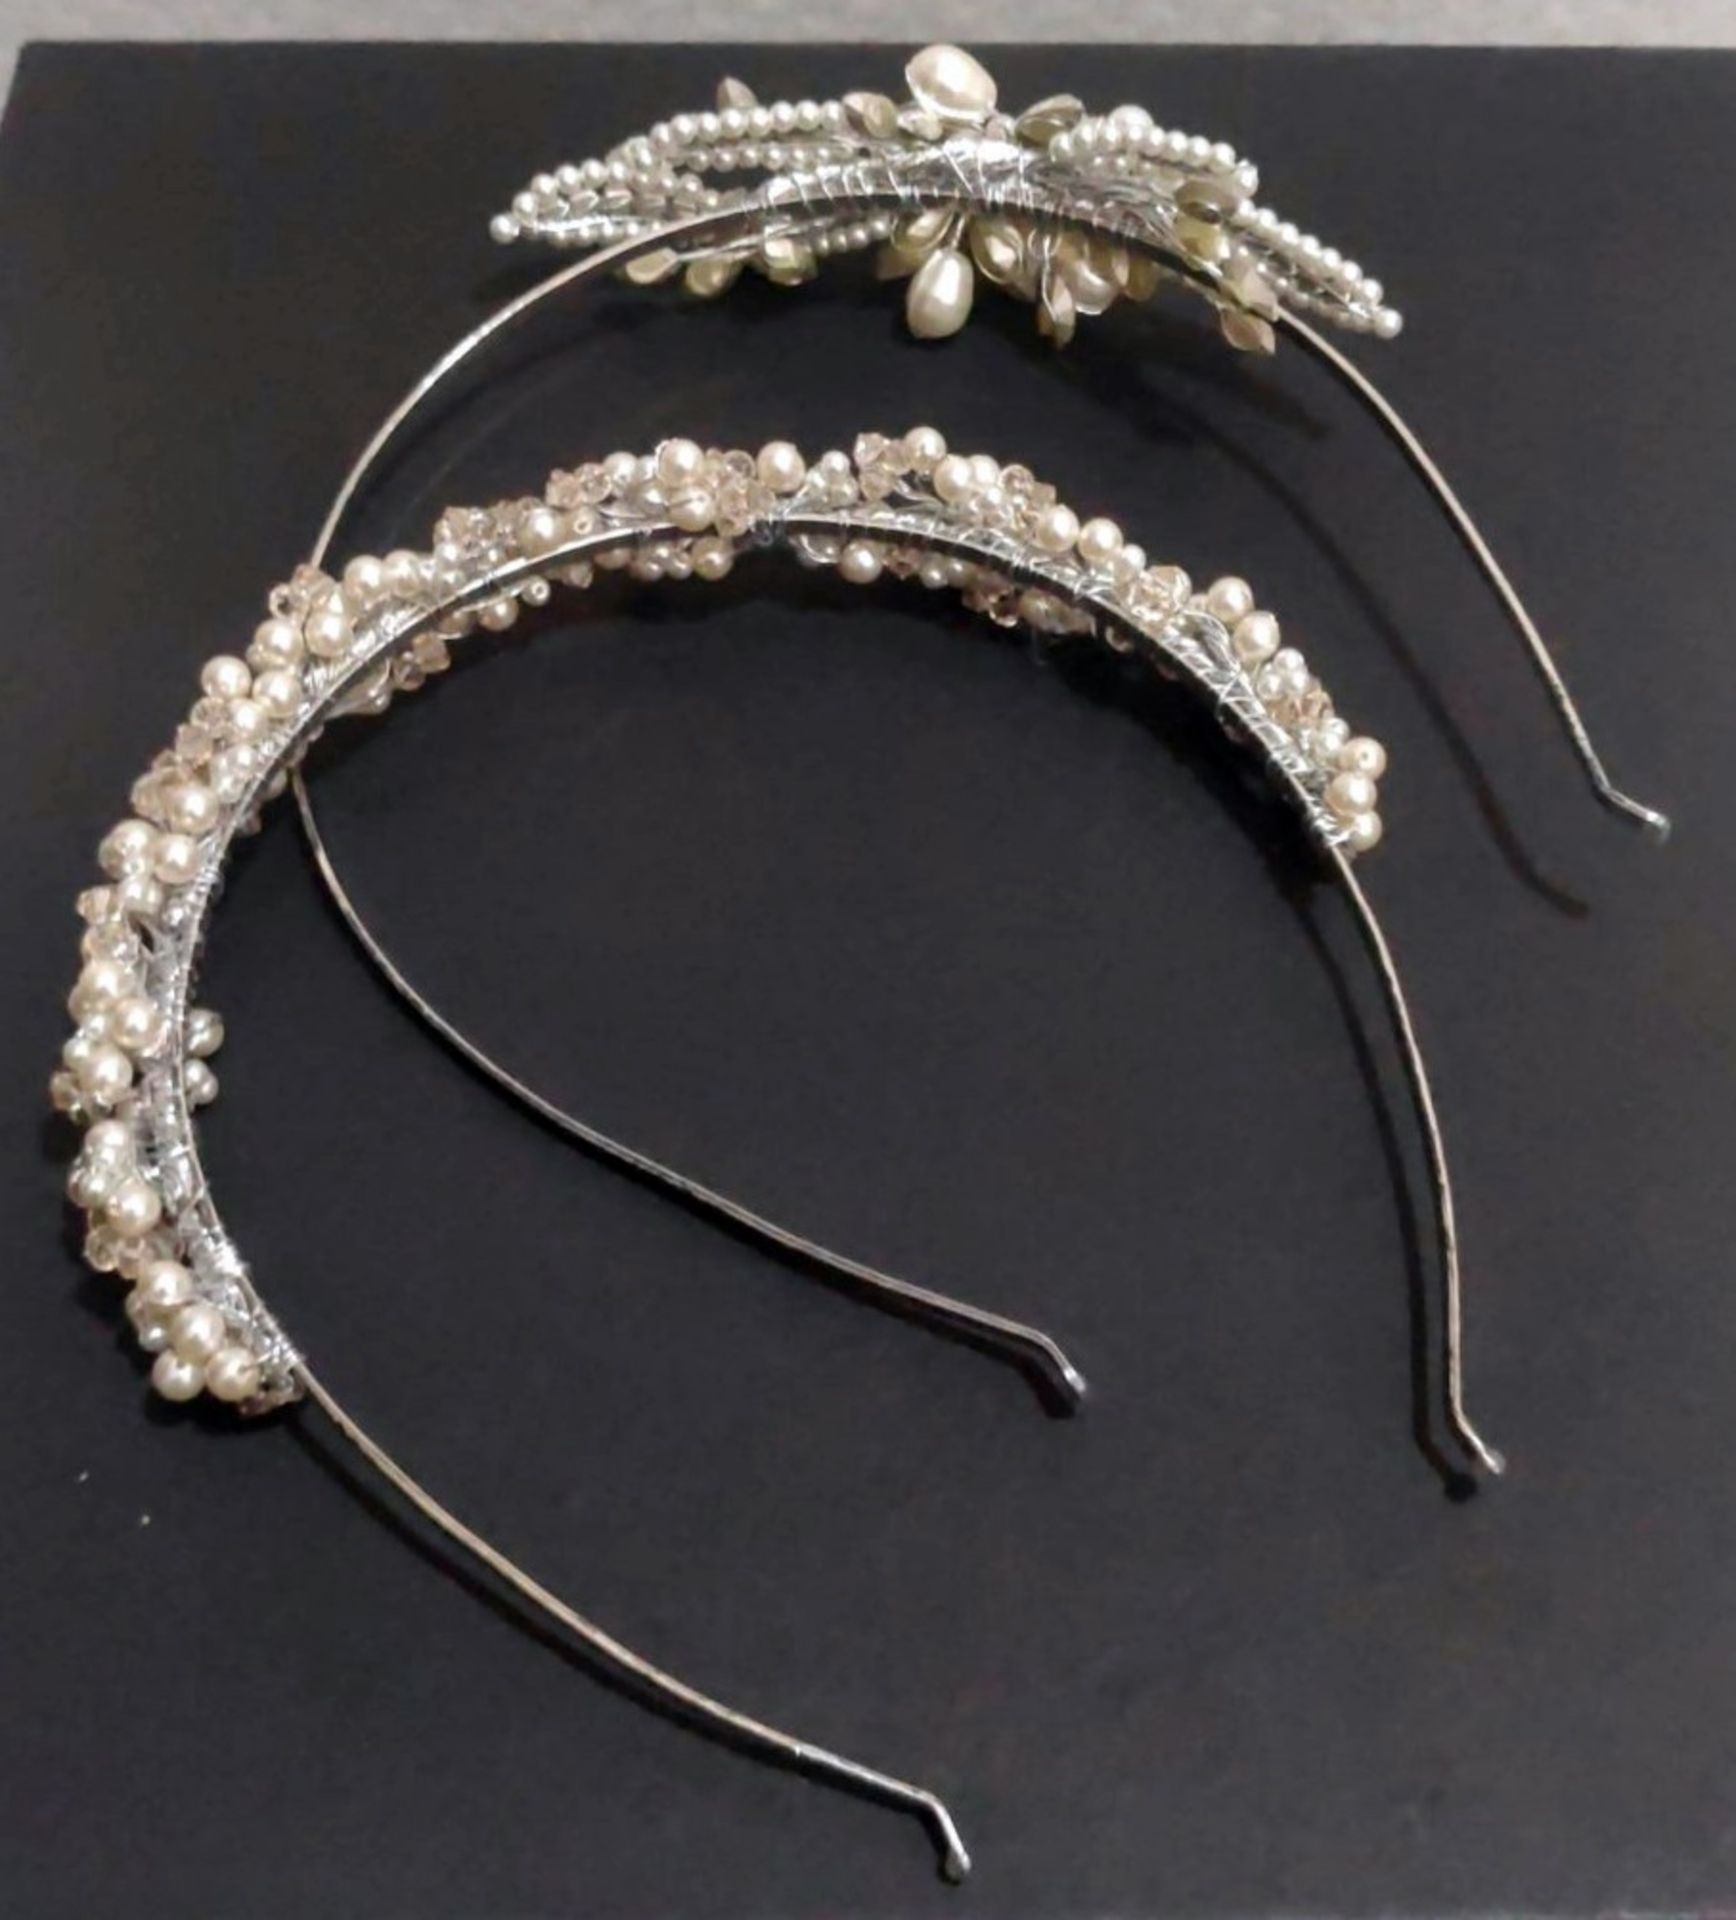 Lot of 2 x LIZA DESIGNS Silver and Pearl Tiaras, Both With Swarovski Elements - New/Unused Stock